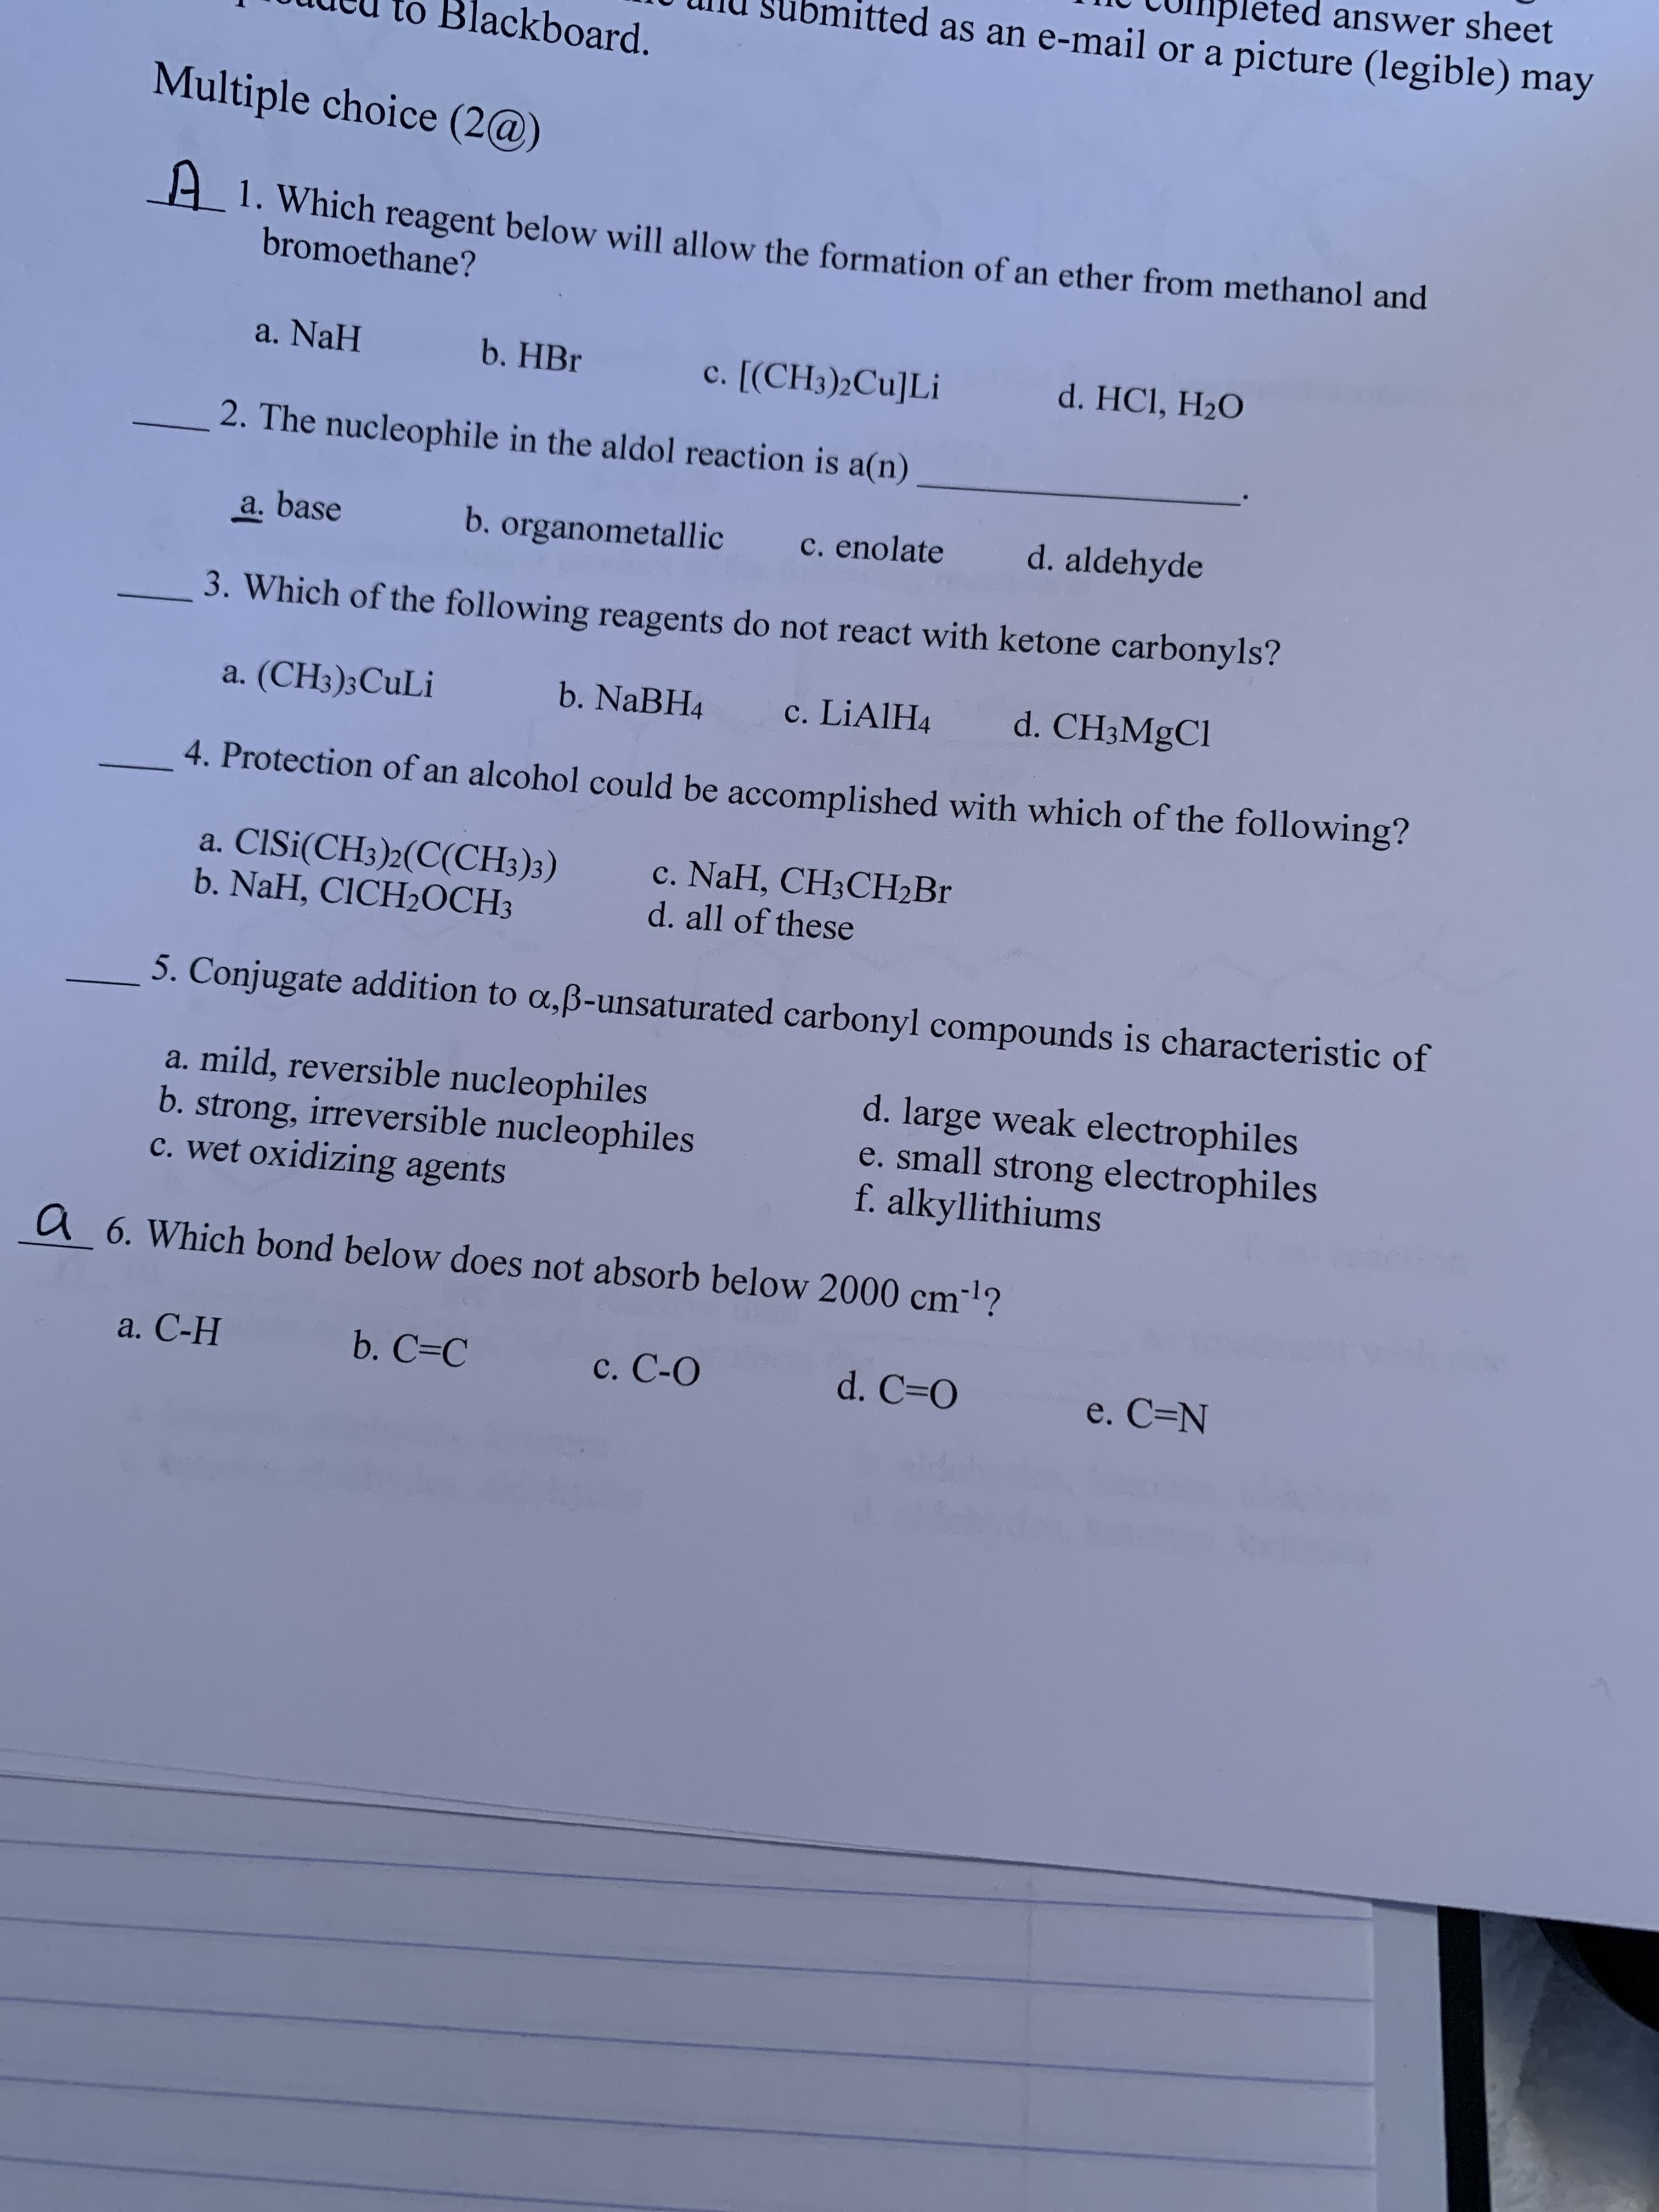 answer sheet
itted as an e-mail or a picture (legible) may
to Blackboard.
Multiple choice (2@)
A 1. Which reagent below will allow the formation of an ether from methanol and
bromoethane?
a. NaH
b. HBr
c. [(CH3)2Cu]Li
d. HCI, H2O
2. The nucleophile in the aldol reaction is a(n)
a. base
b. organometallic
c. enolate
d. aldehyde
3. Which of the following reagents do not react with ketone carbonyls?
a. (CH3)3CUL¡
b. NaBH4
c. LIAIH4
d. CH3MgCl
4. Protection of an alcohol could be accomplished with which of the following?
a. CISi(CH3)2(C(CH3)3)
b. NaH, CICH2OCH3
с. NaH, CH3CН Br
d. all of these
5. Conjugate addition to a,ß-unsaturated carbonyl compounds is characteristic of
a. mild, reversible nucleophiles
b. strong, irreversible nucleophiles
c. wet oxidizing agents
d. large weak electrophiles
e. small strong electrophiles
f. alkyllithiums
a 6. Which bond below does not absorb below 2000 cm-l?
ст
a. С-Н
b. C=C
c. C-O
d. C=O
e. C=N
